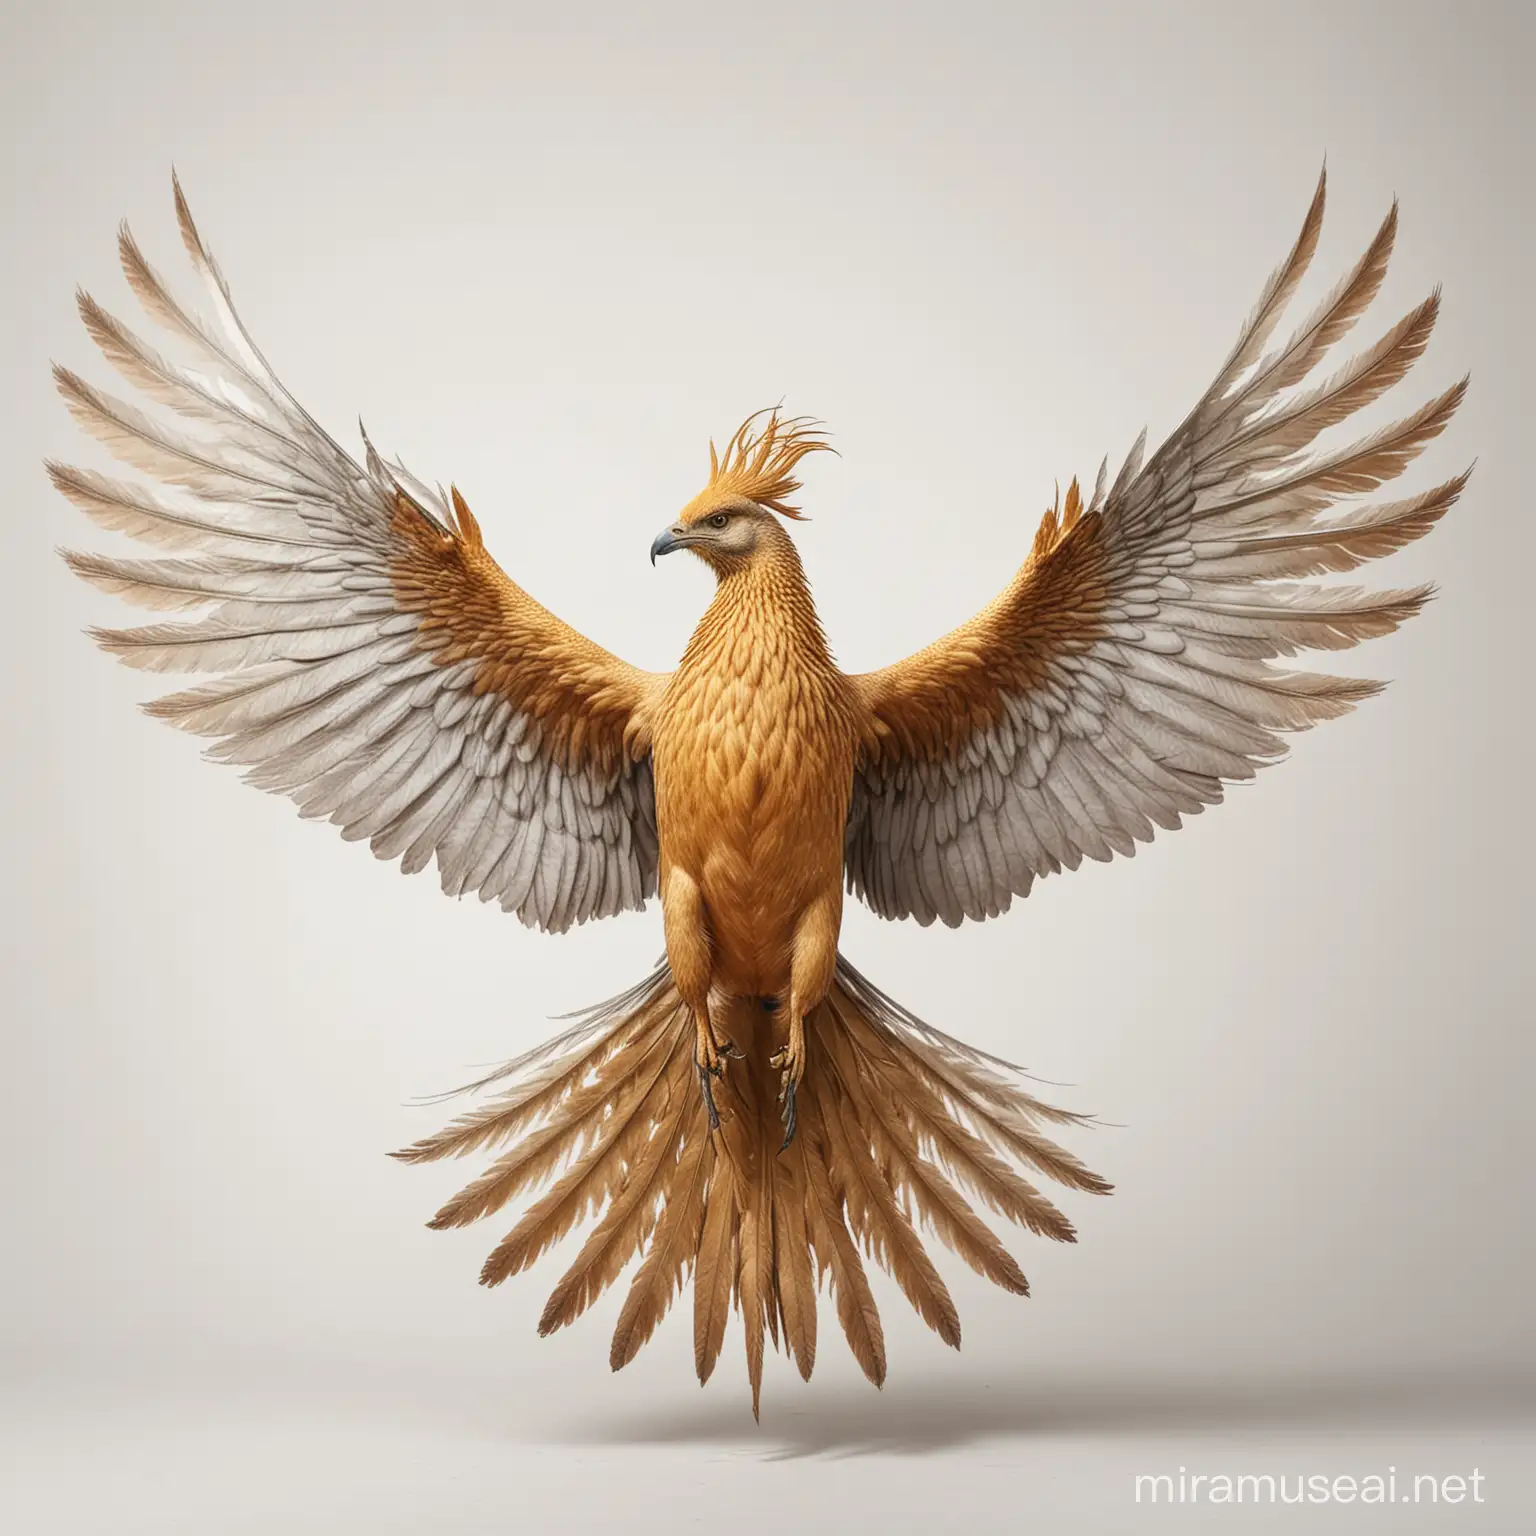 Persian phoenix with long wings in white background